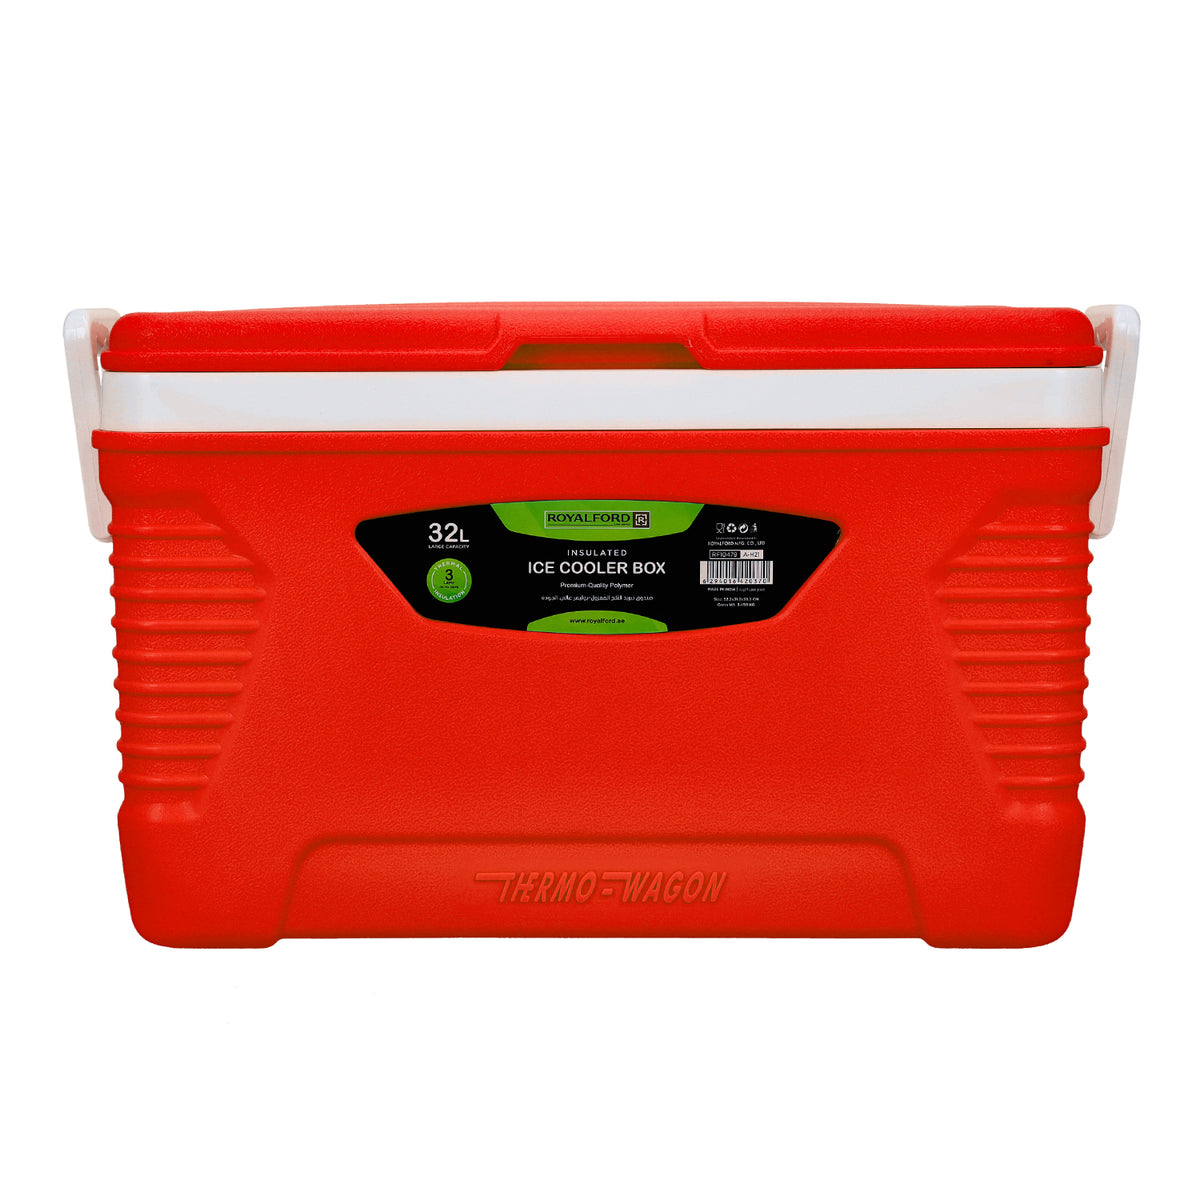 32L Portable Insulated Red Ice Cooler Box